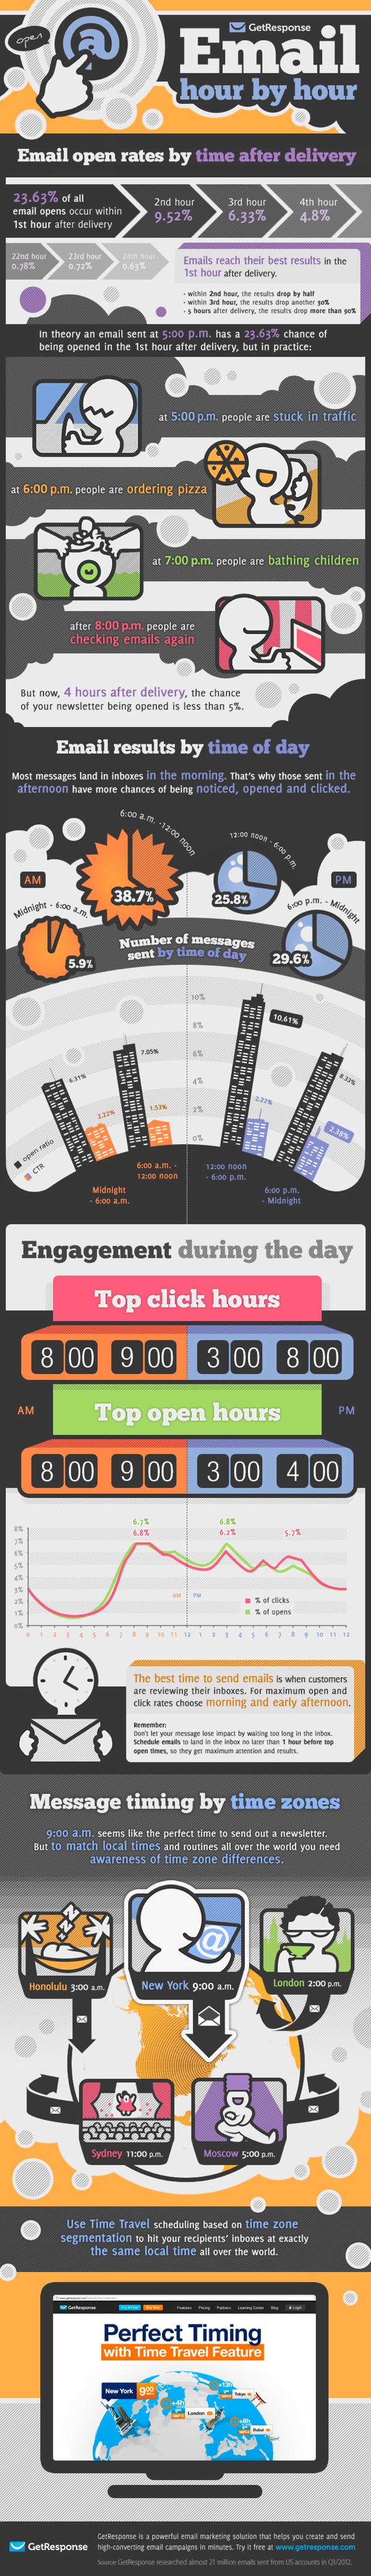 Best-Time-To-Share-Infographic